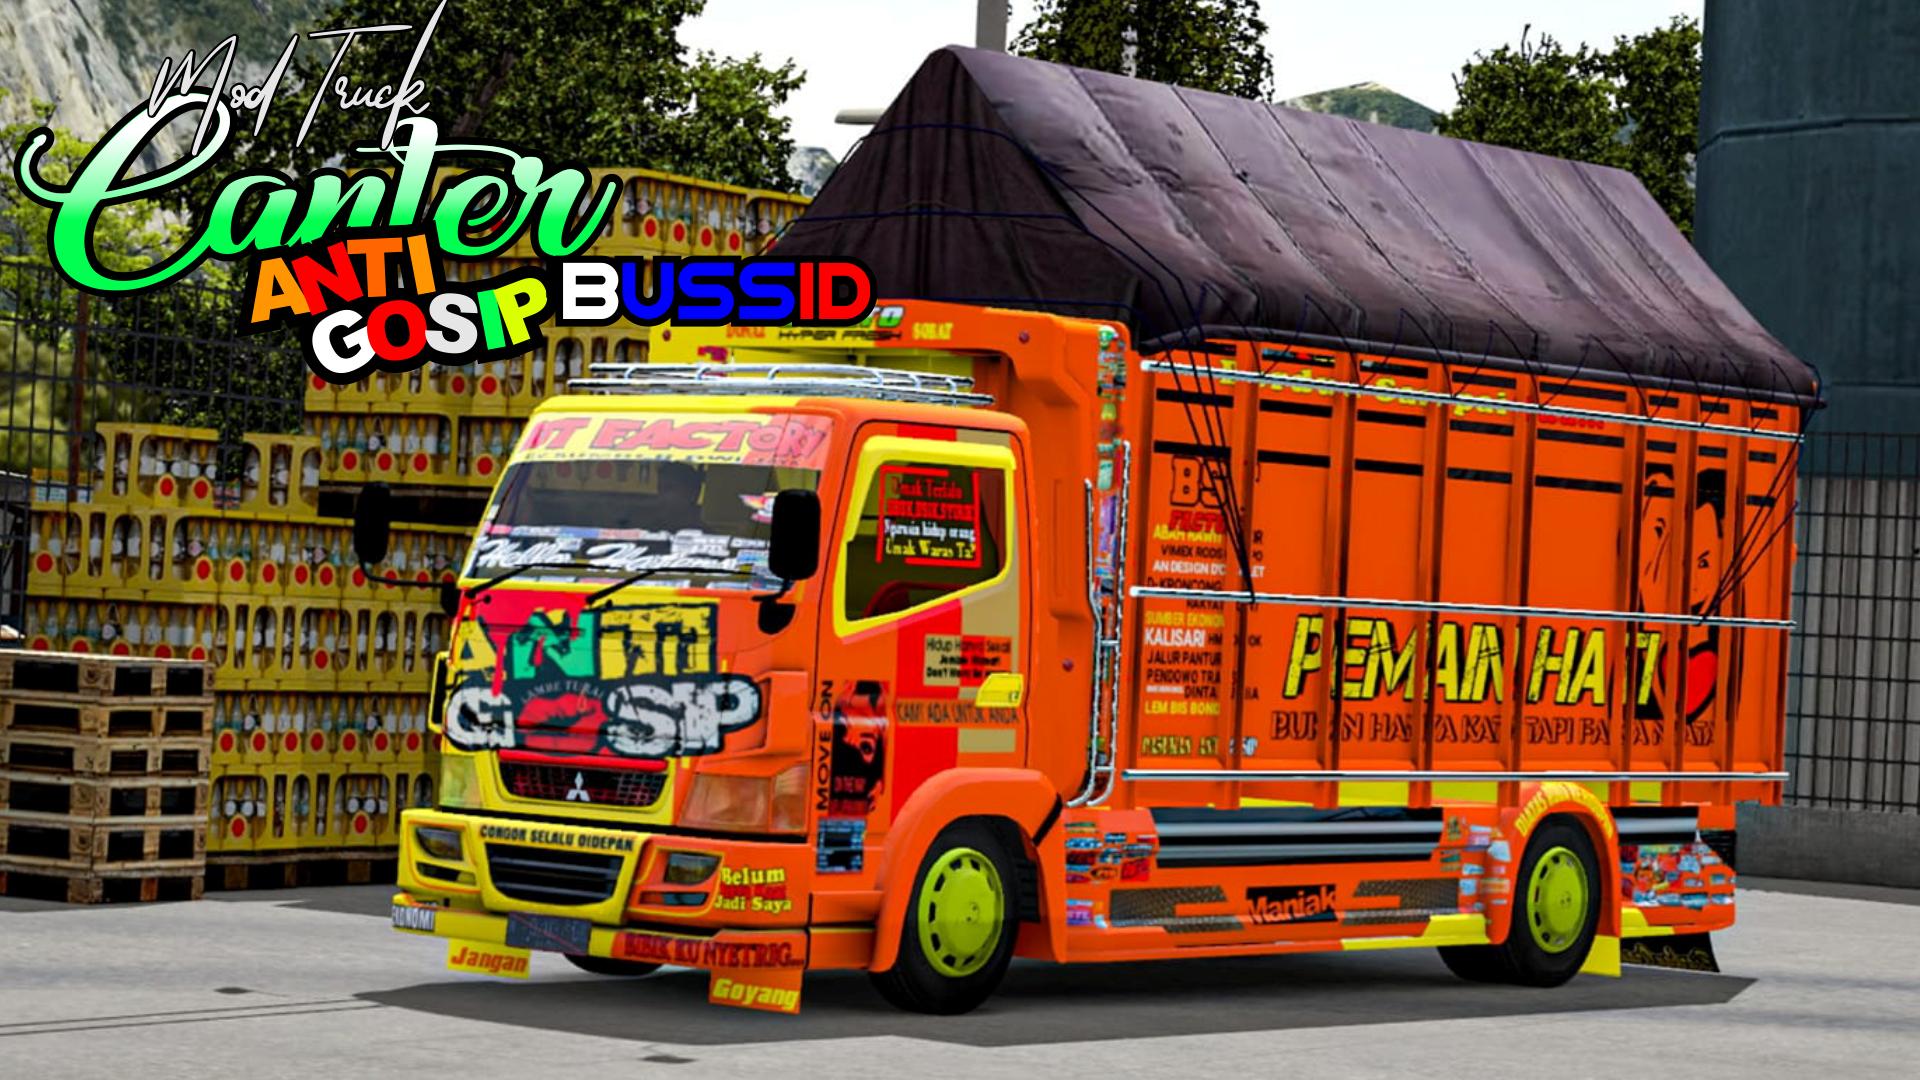 Mod Truck Canter Anti Gosip Bussid For Android Apk Download